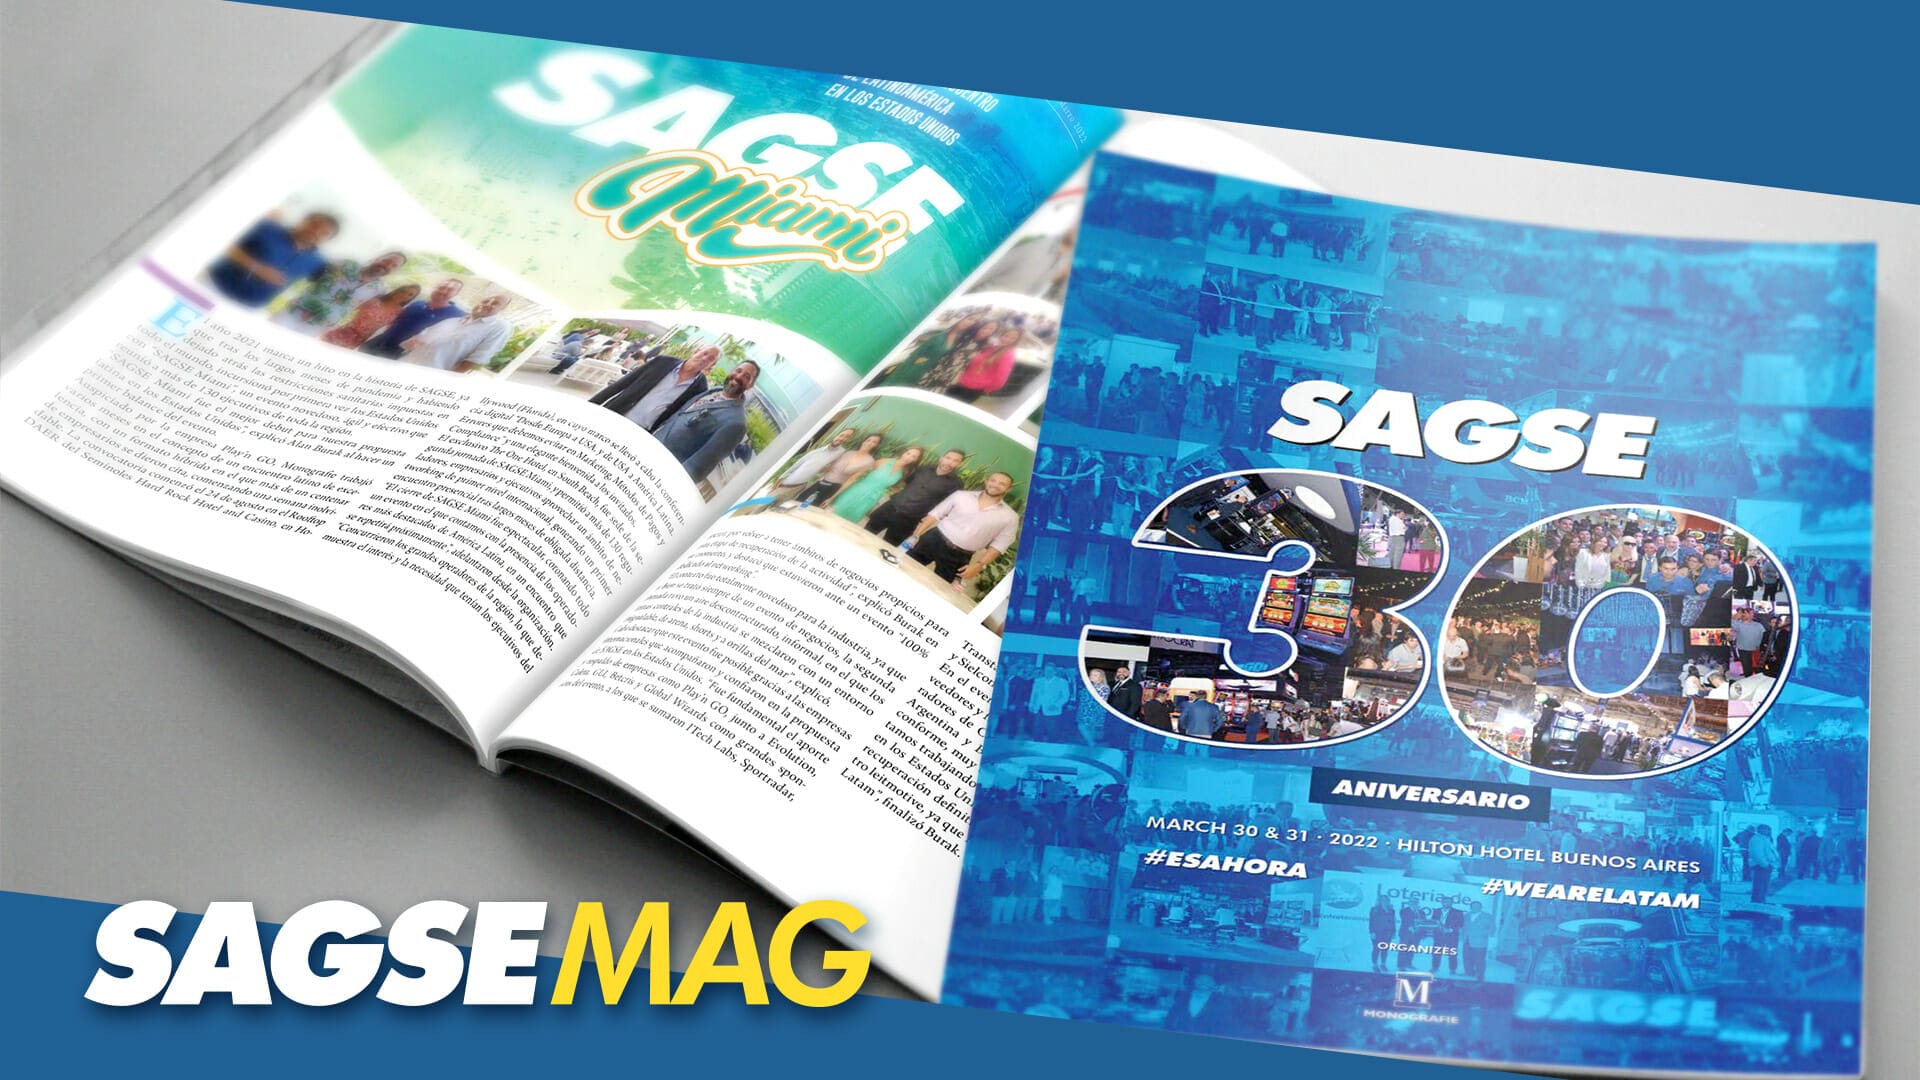 SAGSE announces the launch of the digital version of its magazine